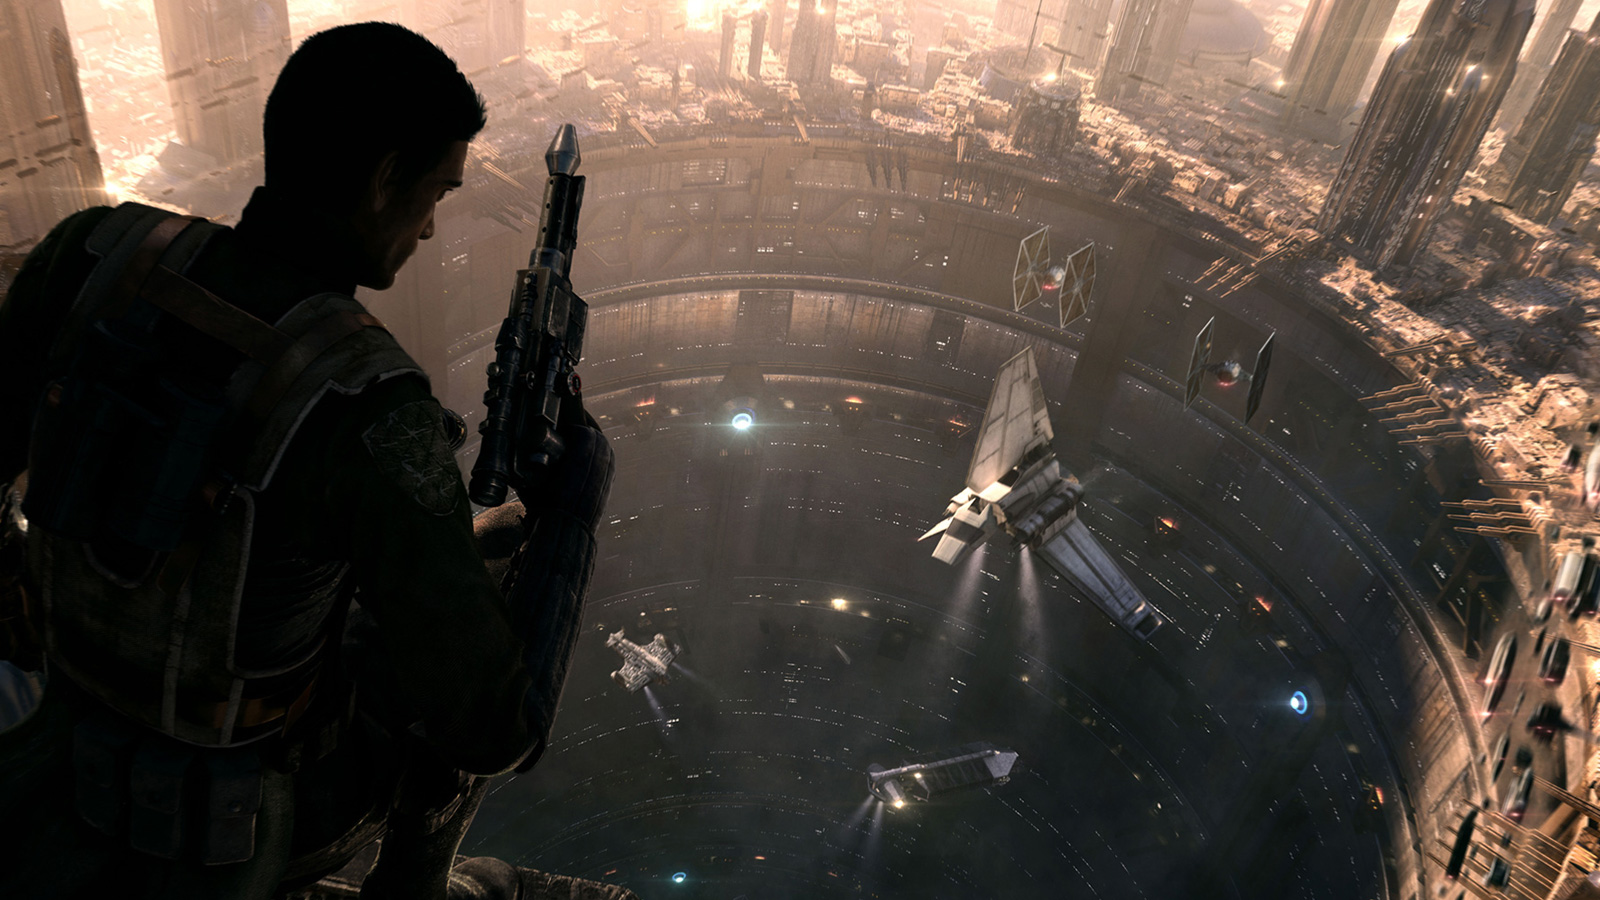 LucasFilm Head Says “Star Wars 1313” Isn’t Completely Dead - Mostly Dead, not All Dead